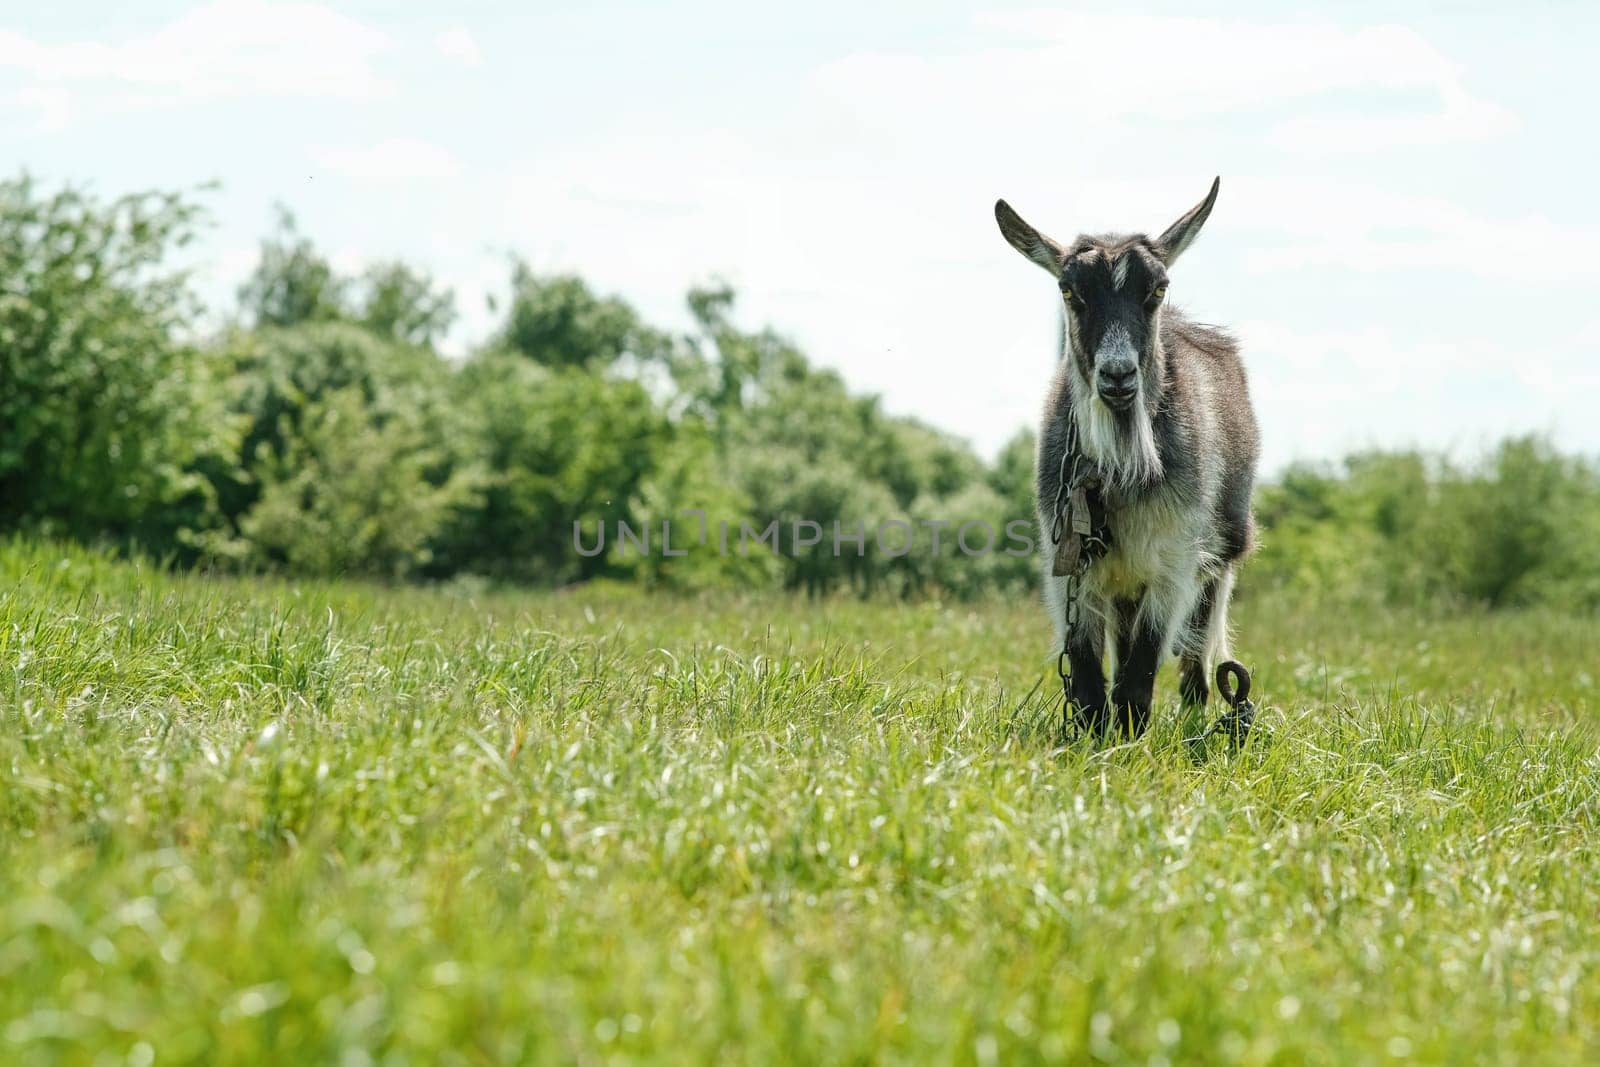 Gray spotted hornless goat. The goat grazes on the green grass. Goat close-up. A goat grazes on a tied flail in a meadow.